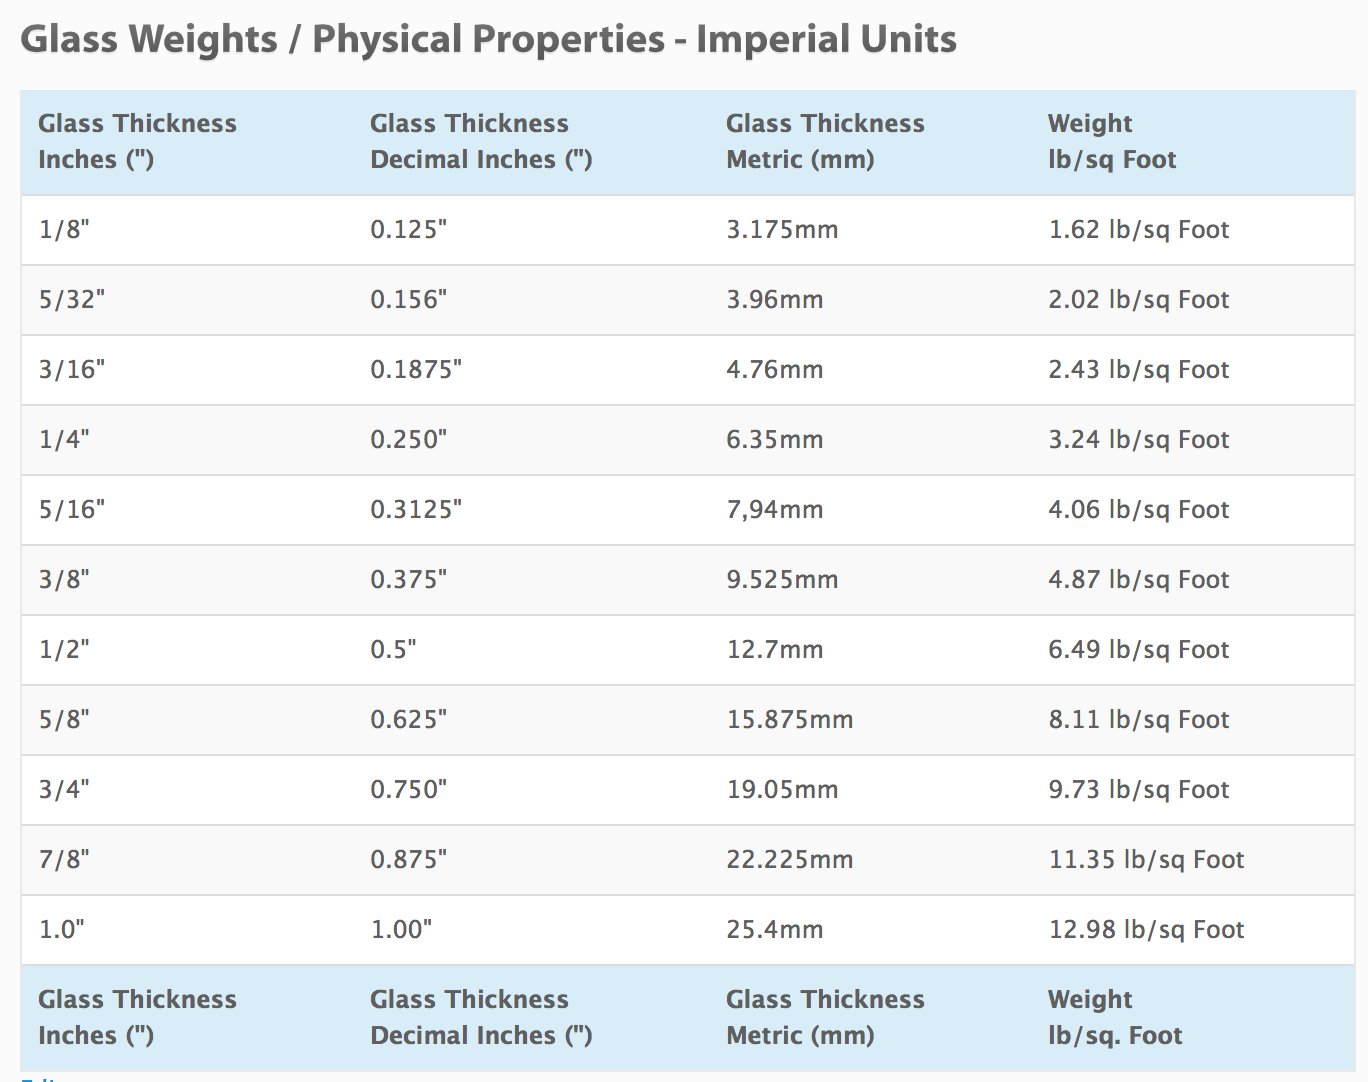 Glass_Weights_Imperial.tiff